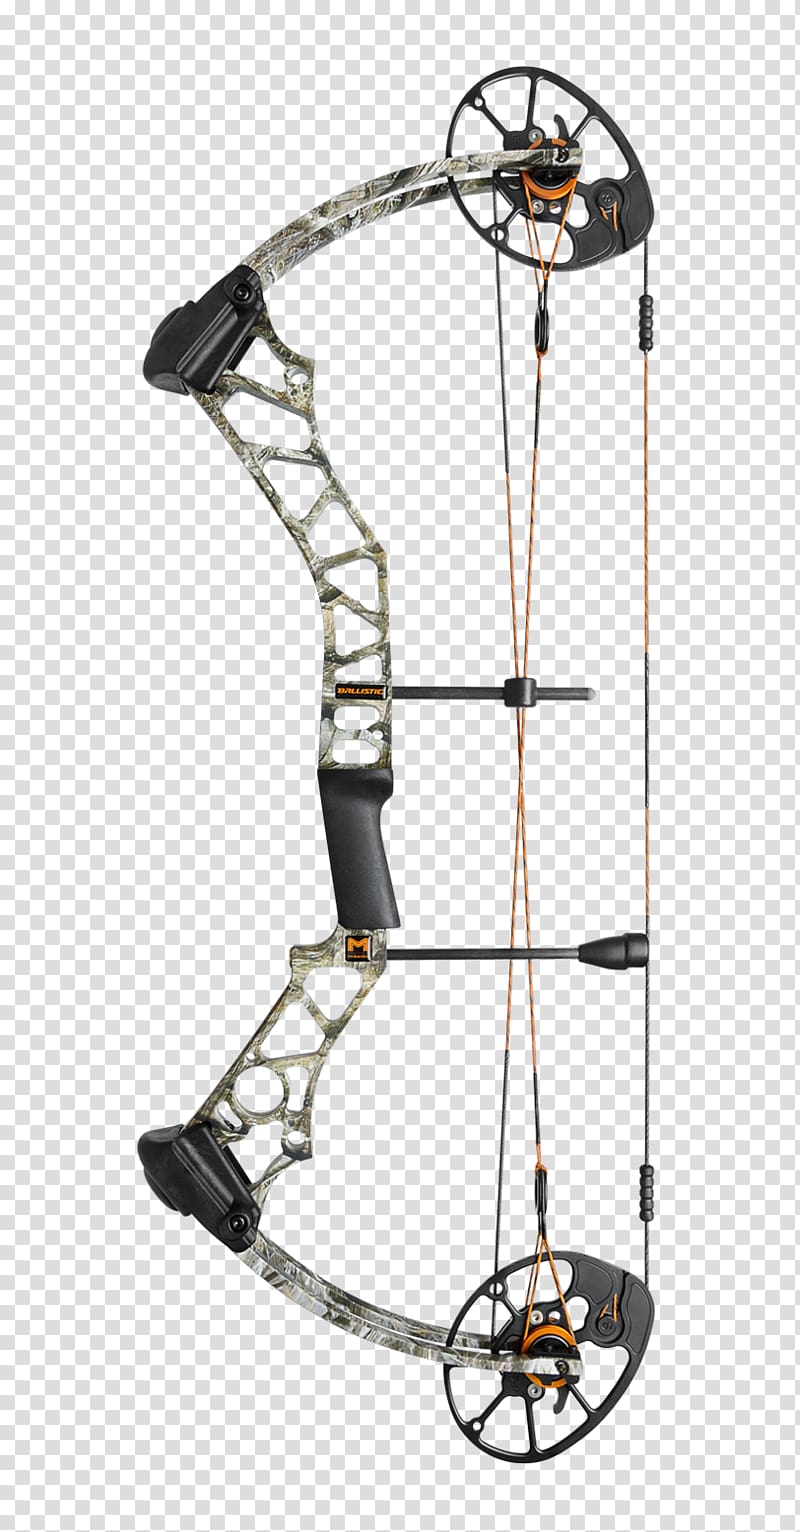 Hunting Archery Compound Bows Ballistics Bow and arrow, others transparent background PNG clipart